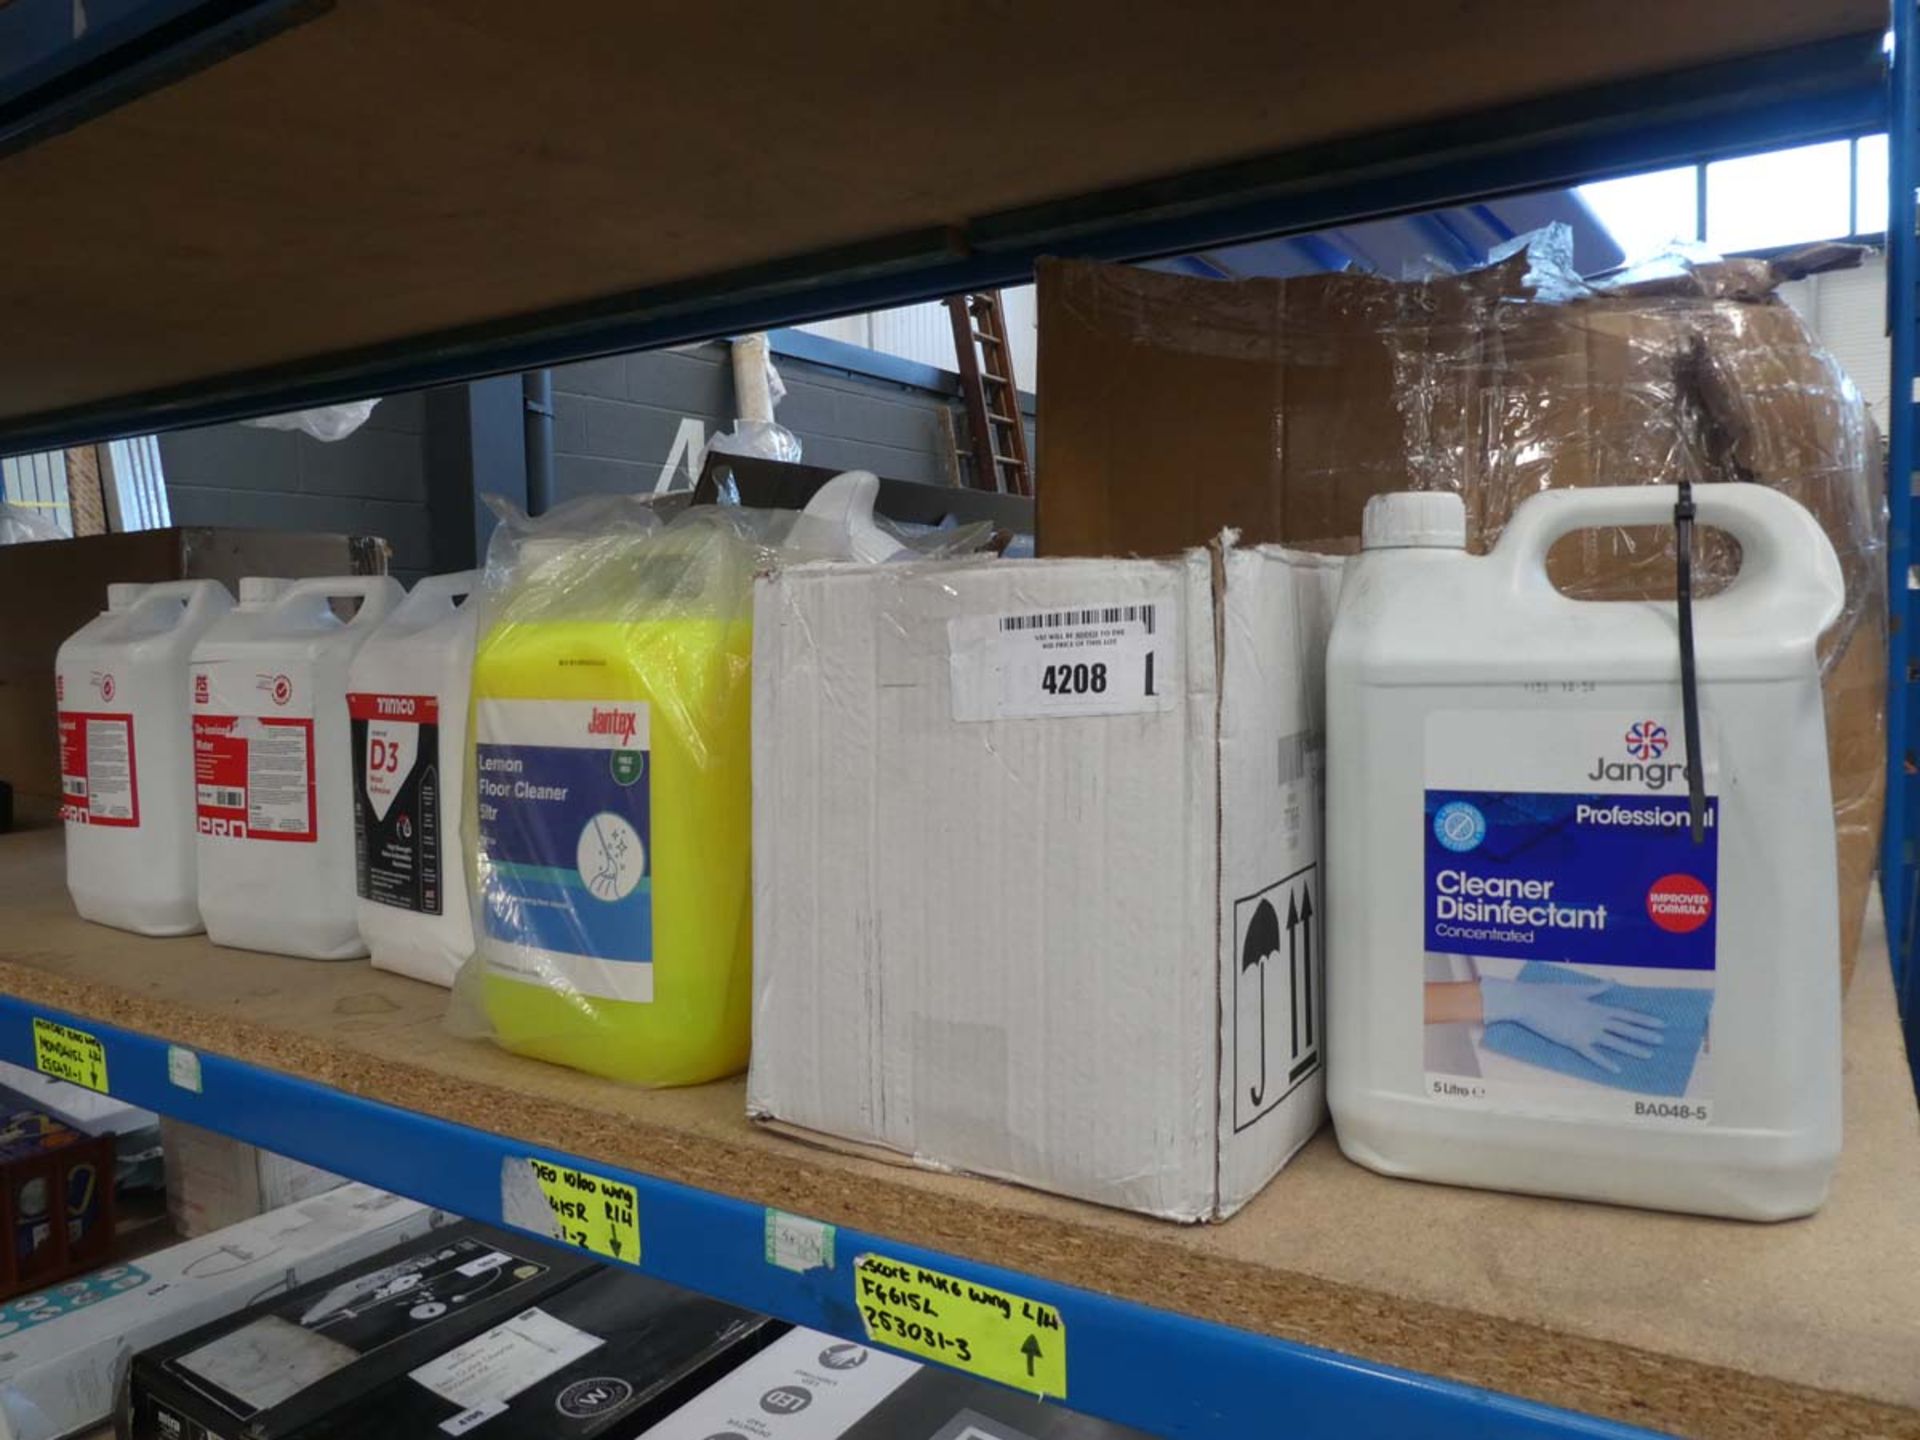 Quarter shelf of chemicals to include disinfectant, floor cleaner, deionised water etc.